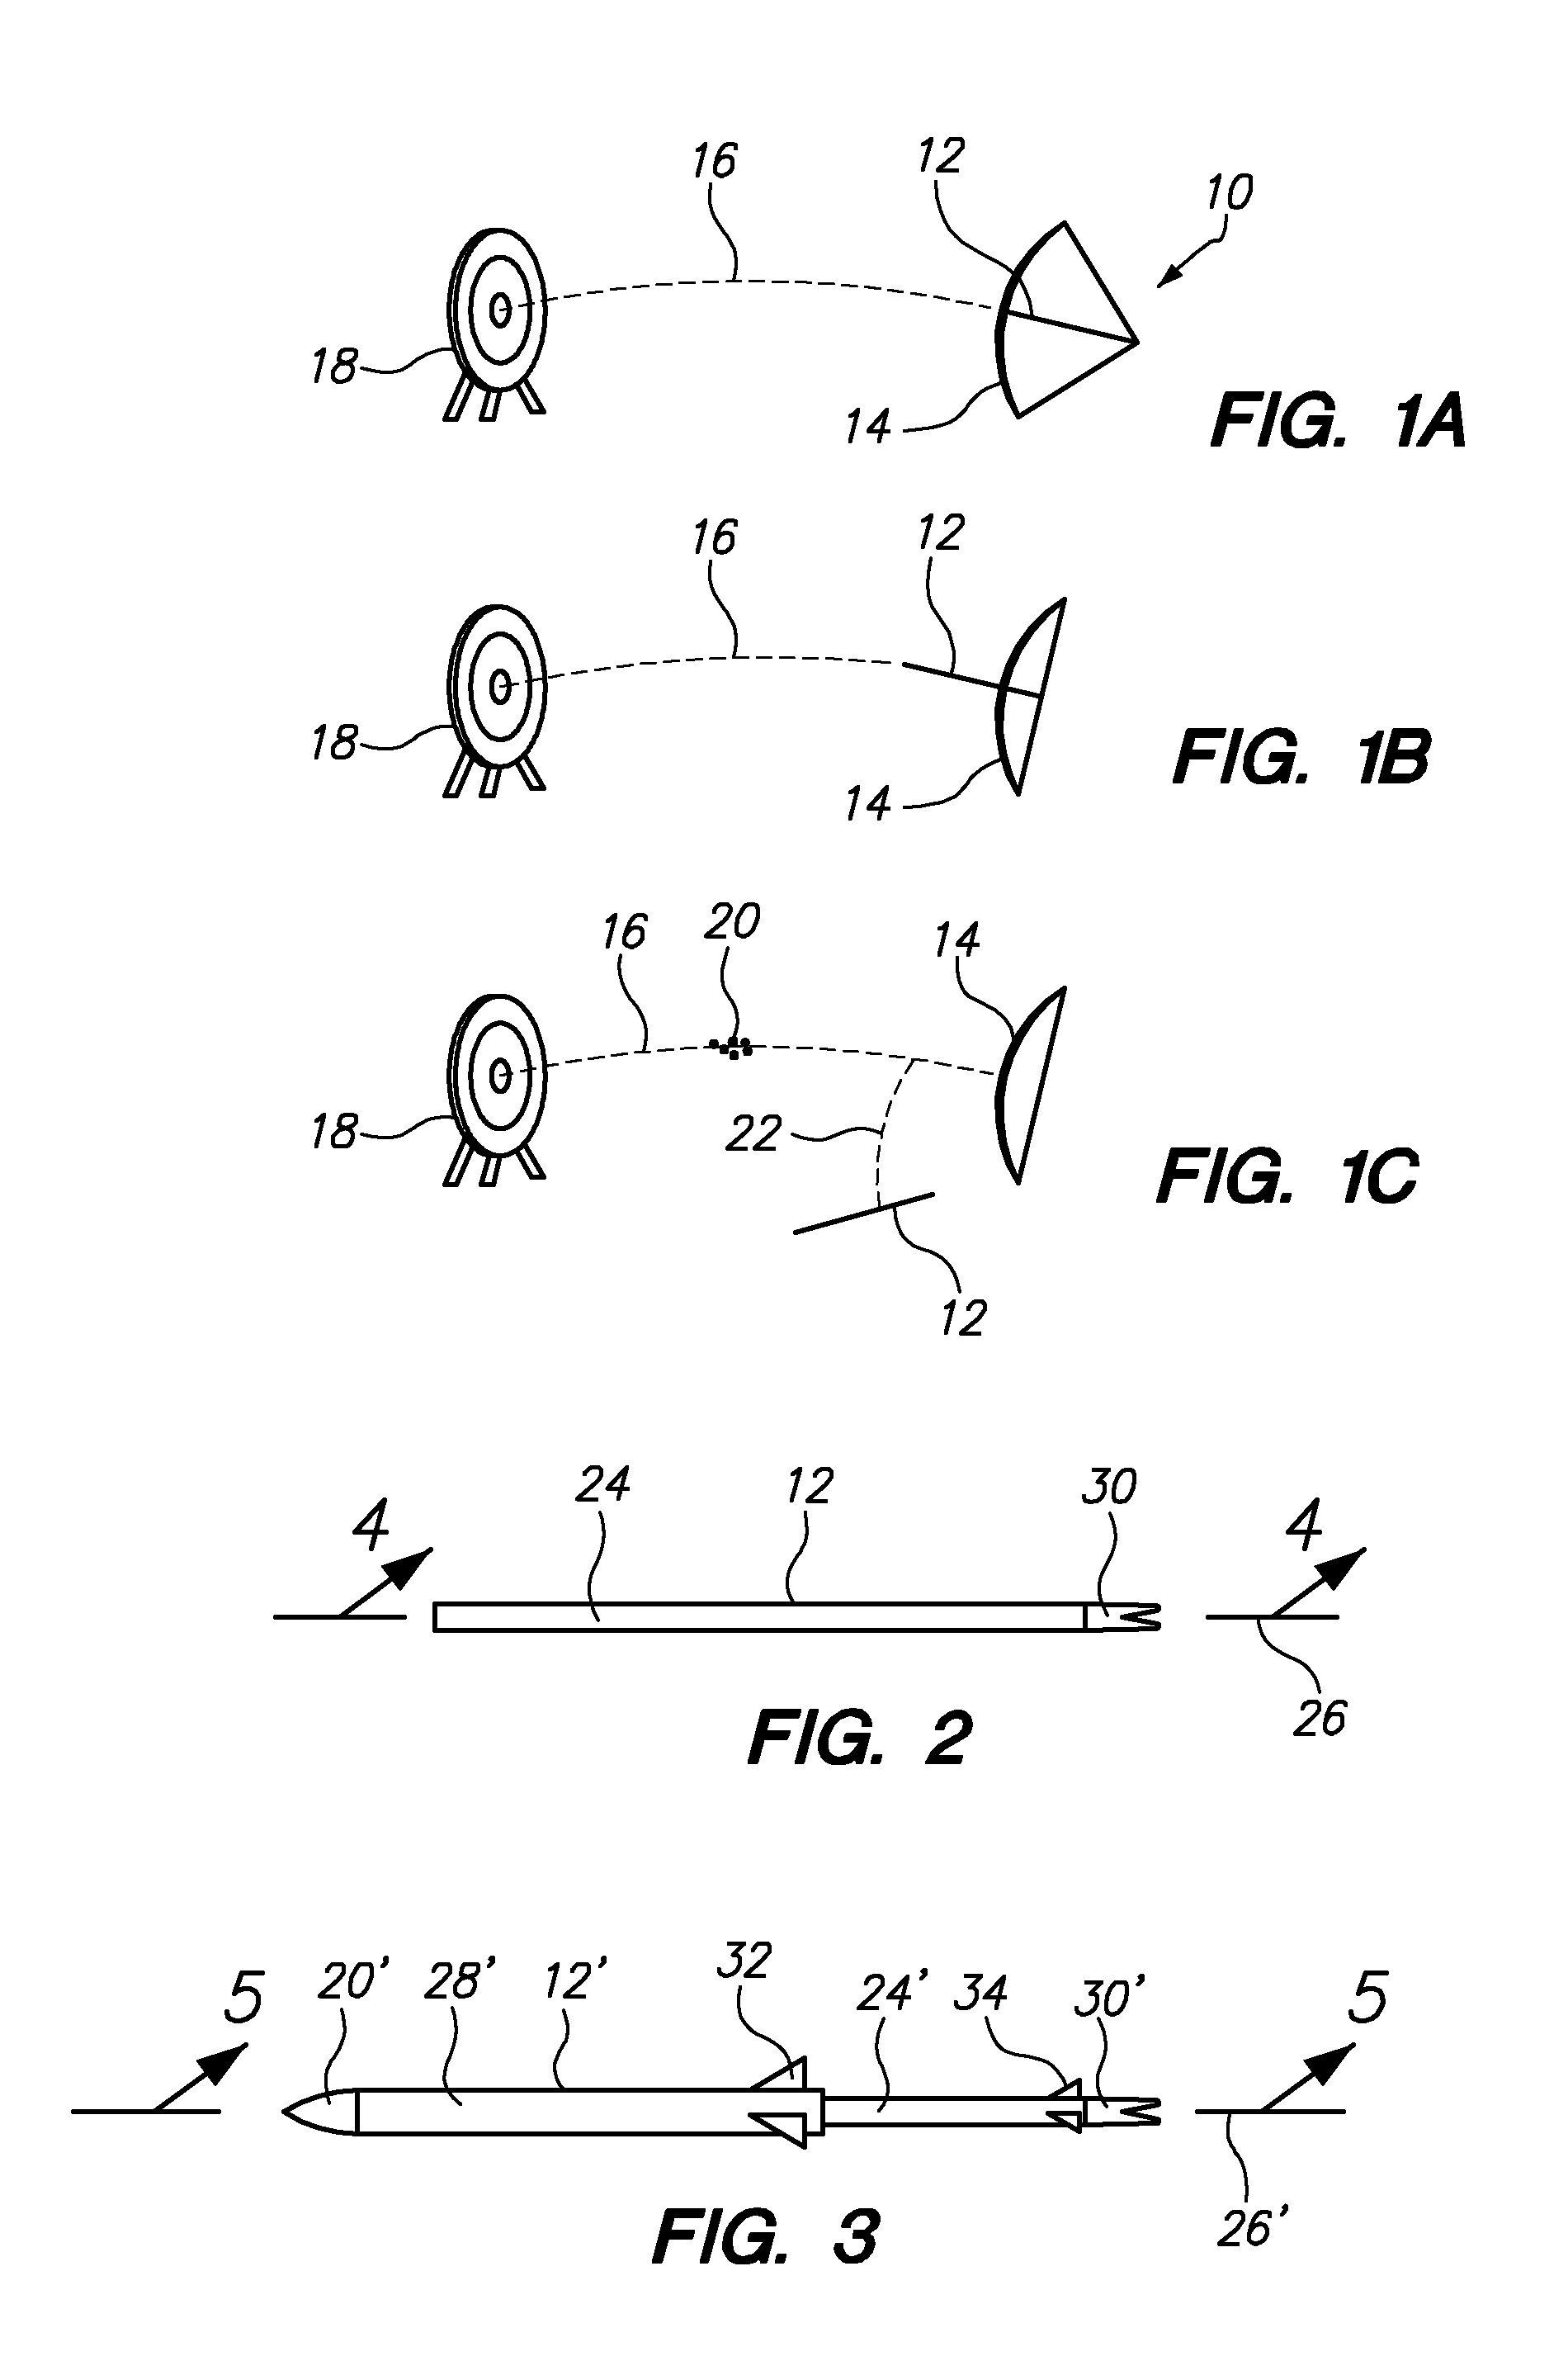 Two-phase projectile with a proximal compression chamber